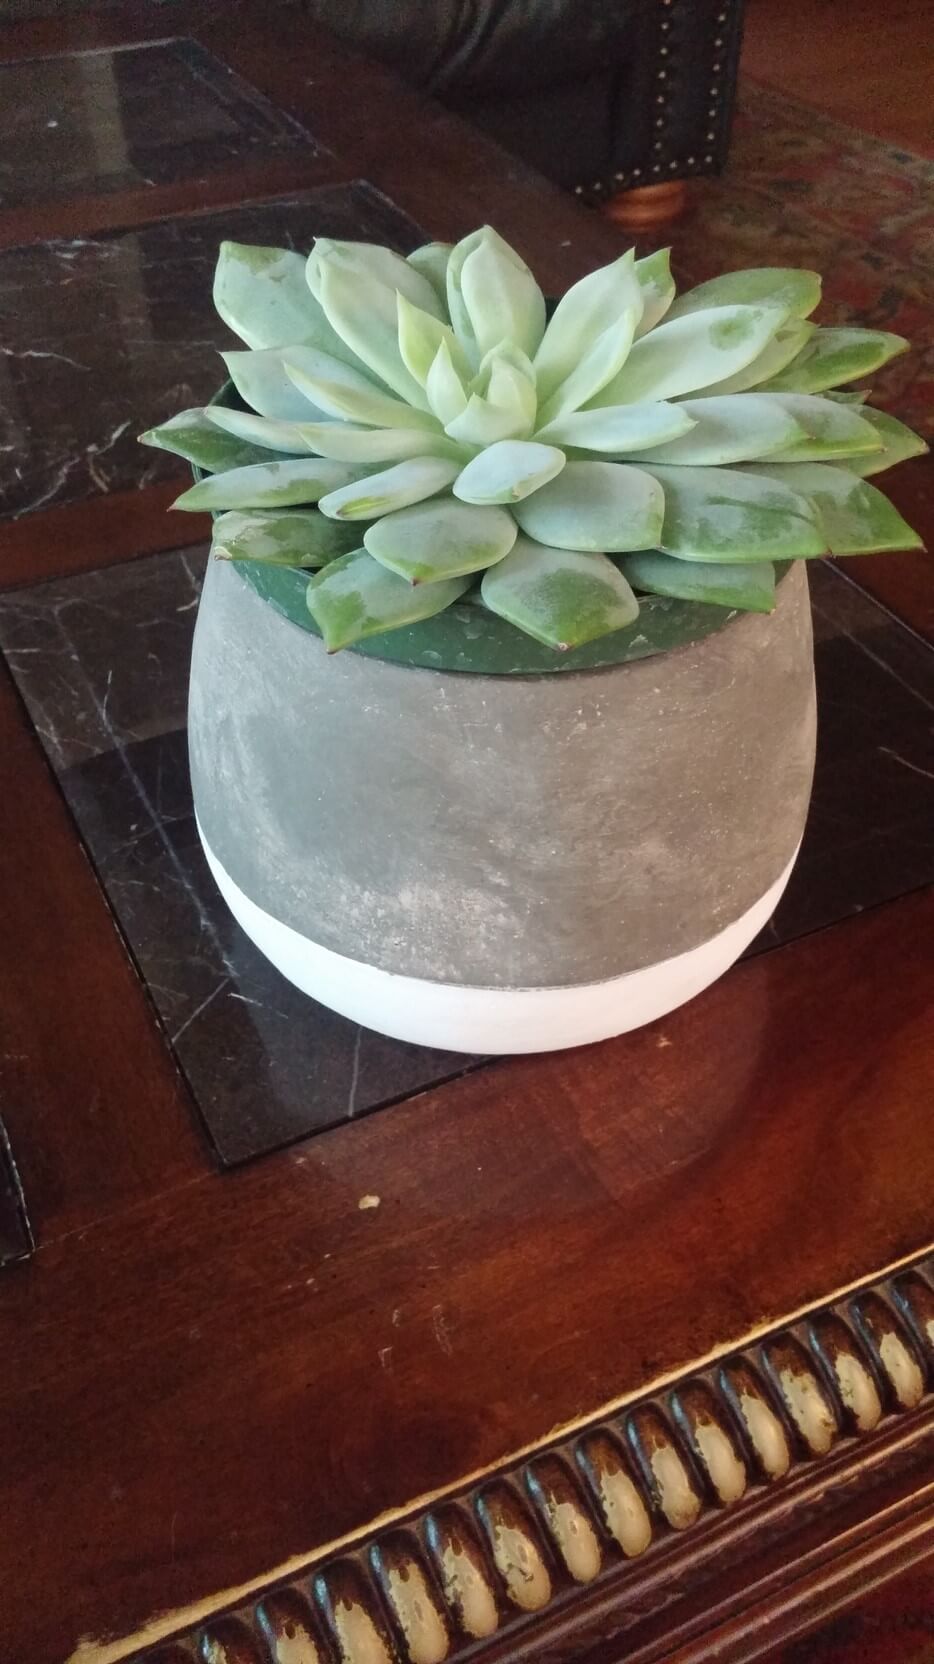 The succulent is consistently reliable in its beauty and health....great addition to any happy place1